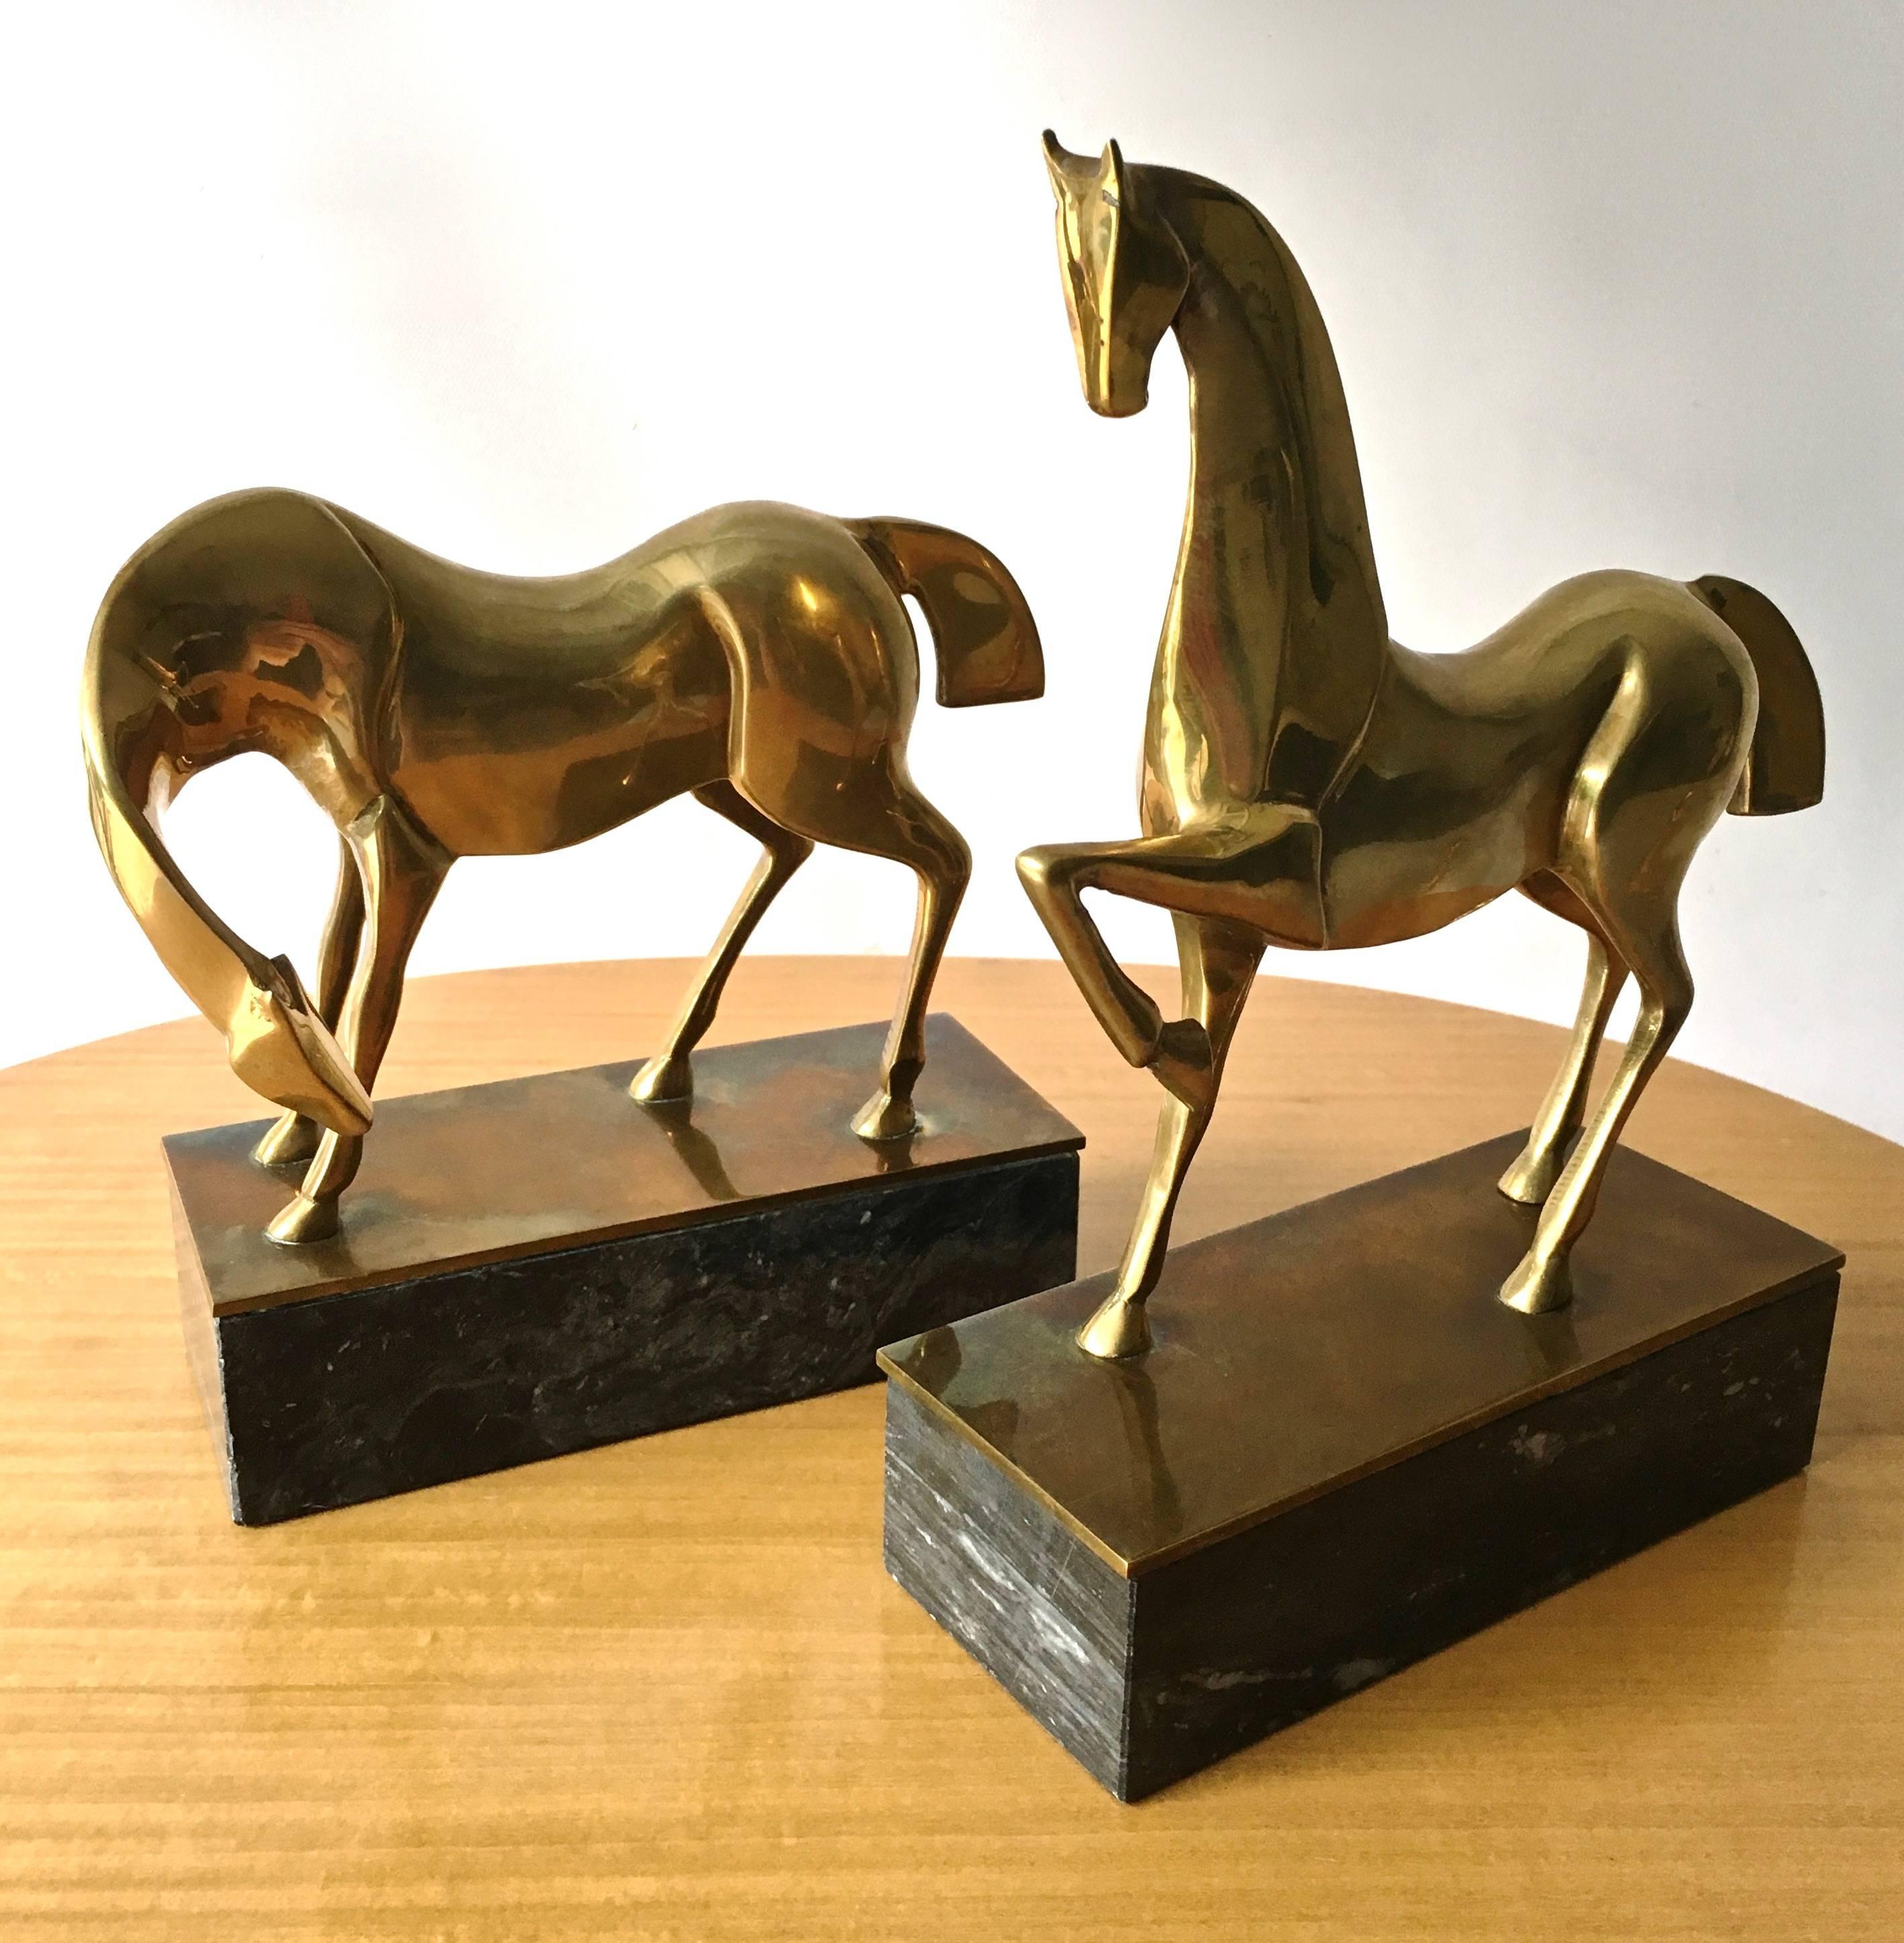 A majestic pair of Etruscan horse in brass finish with oxidized highlights, on marble bases in Manner of renown sculptors Boris Lovet-Lorski and Elie Nadelman.

Each base measures 6